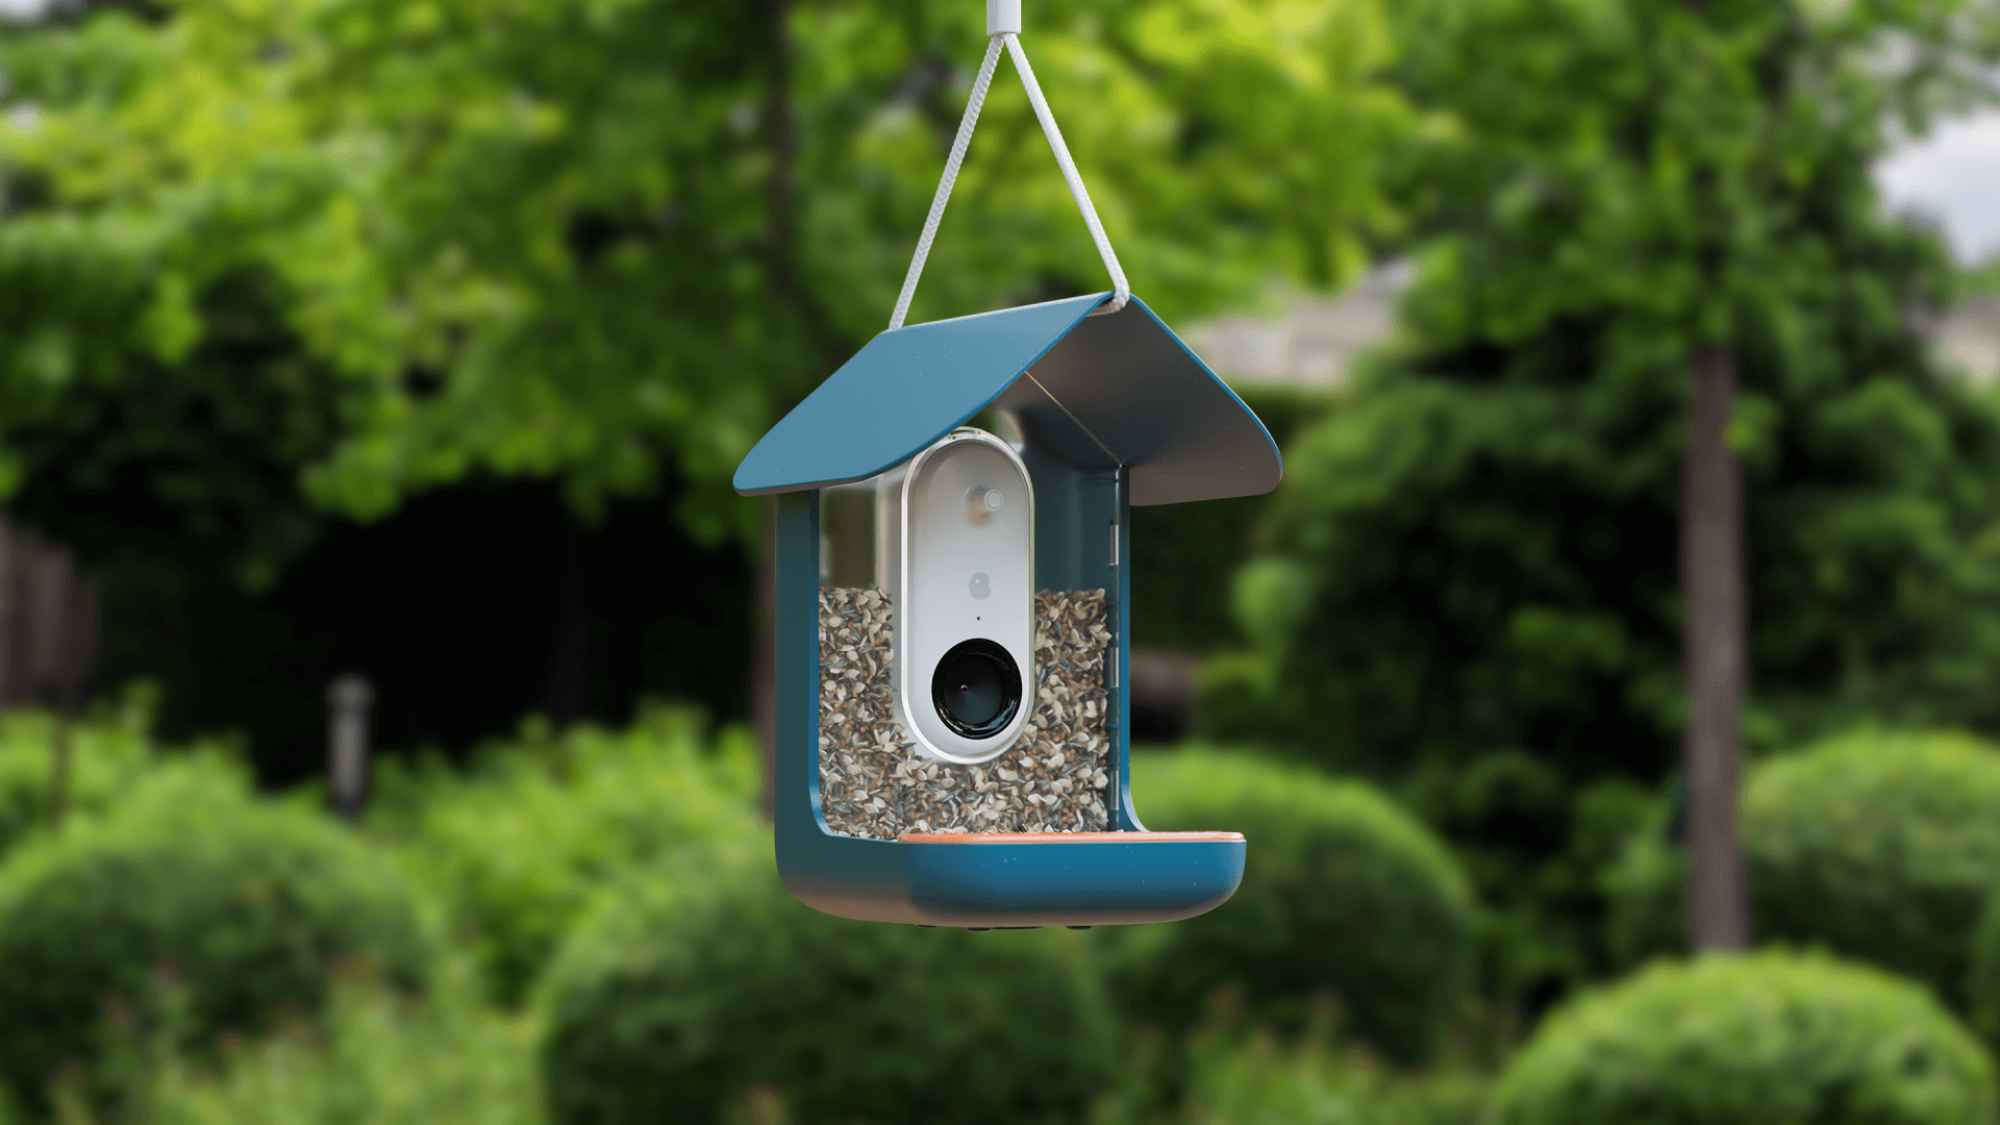 A seed-filled bird feeder with a blue roof and a camera module in the middle 